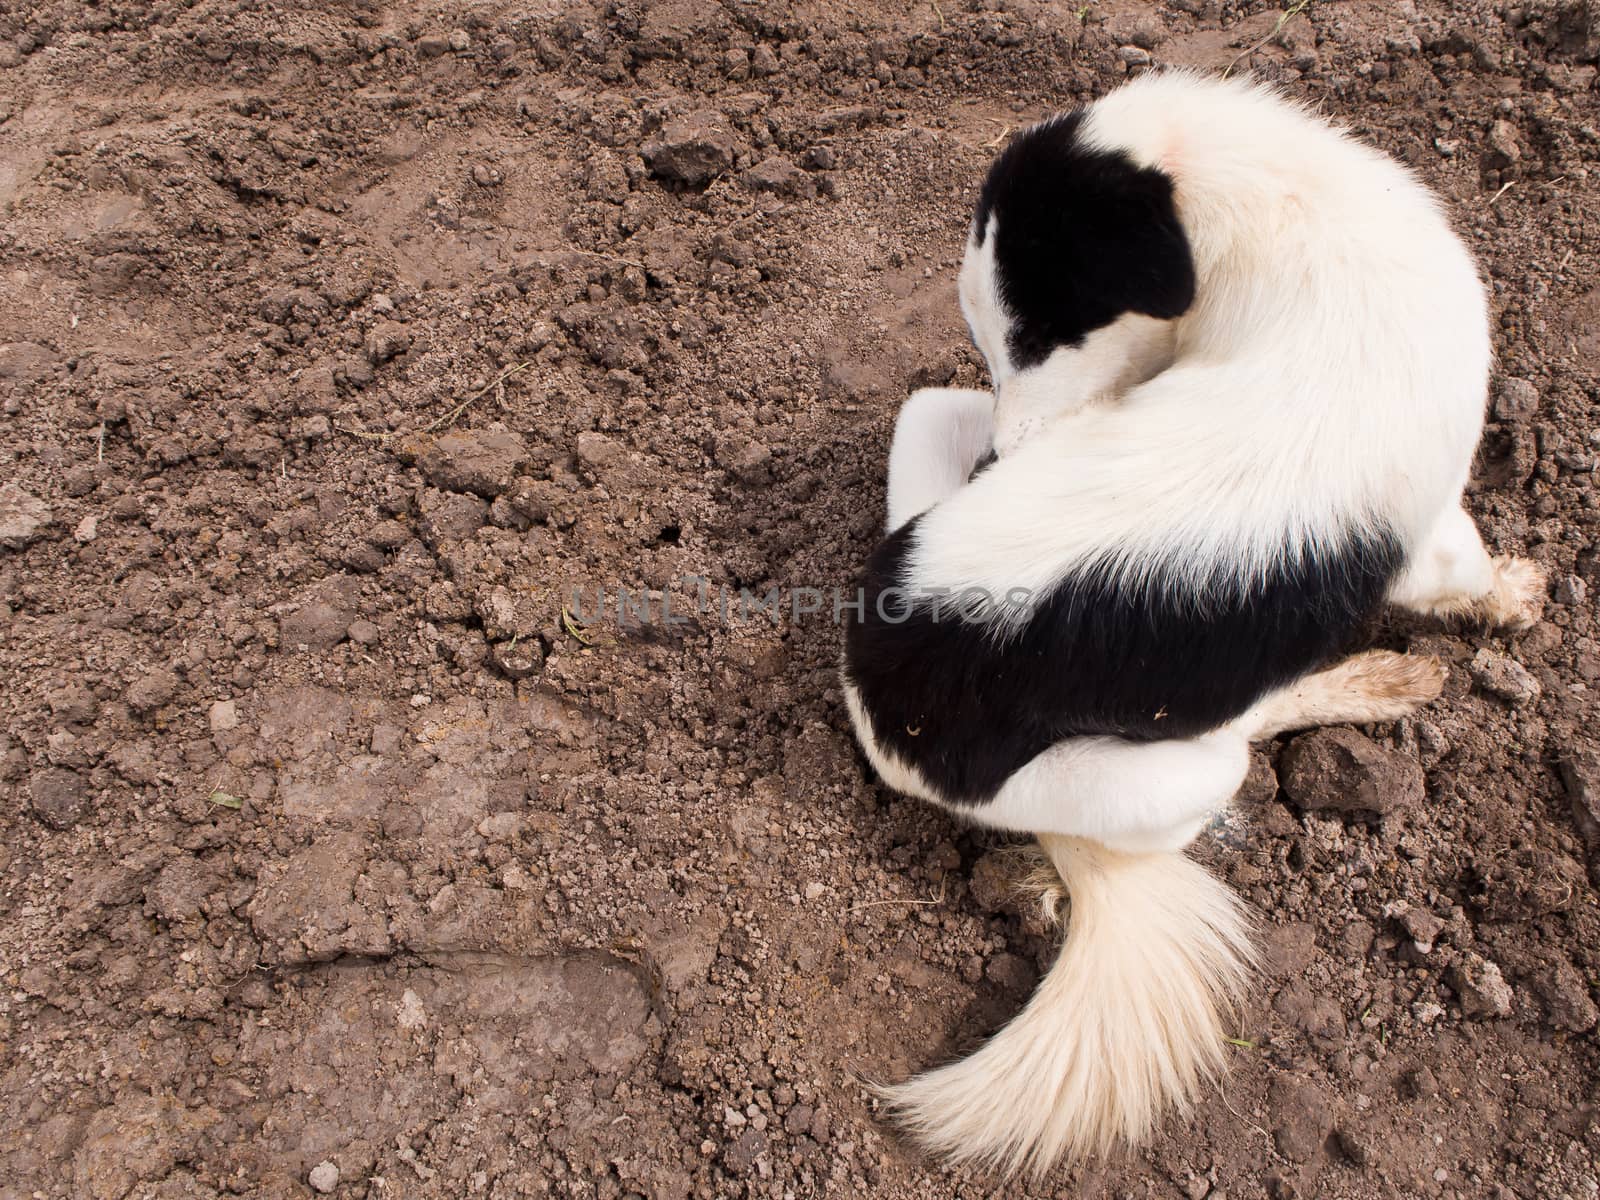 The white and black dog sit on ground